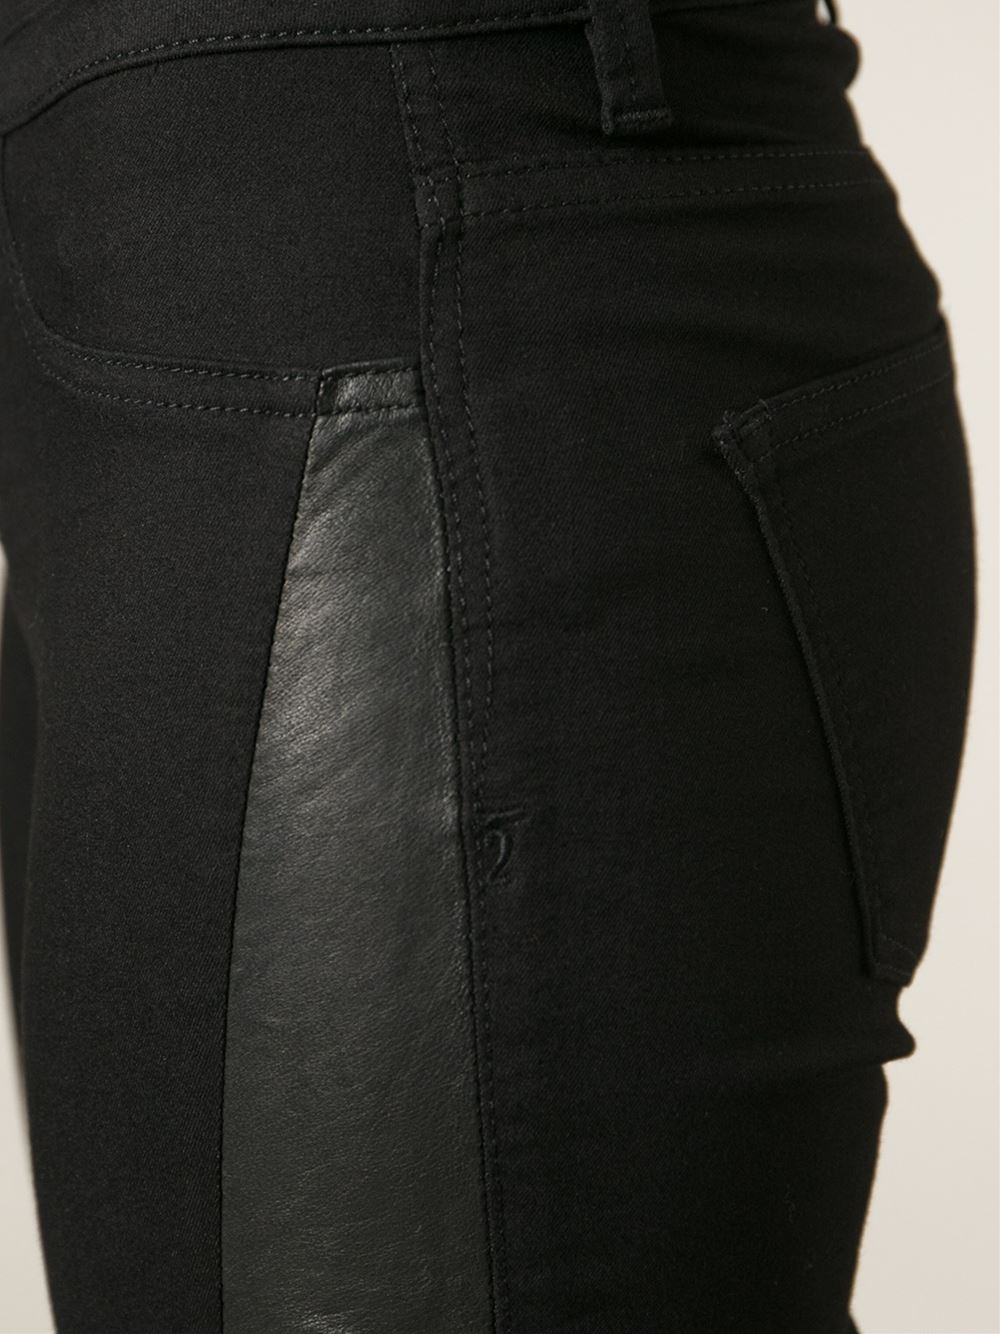 2nd Day Jolie Leather Panel Jeans in Black - Lyst